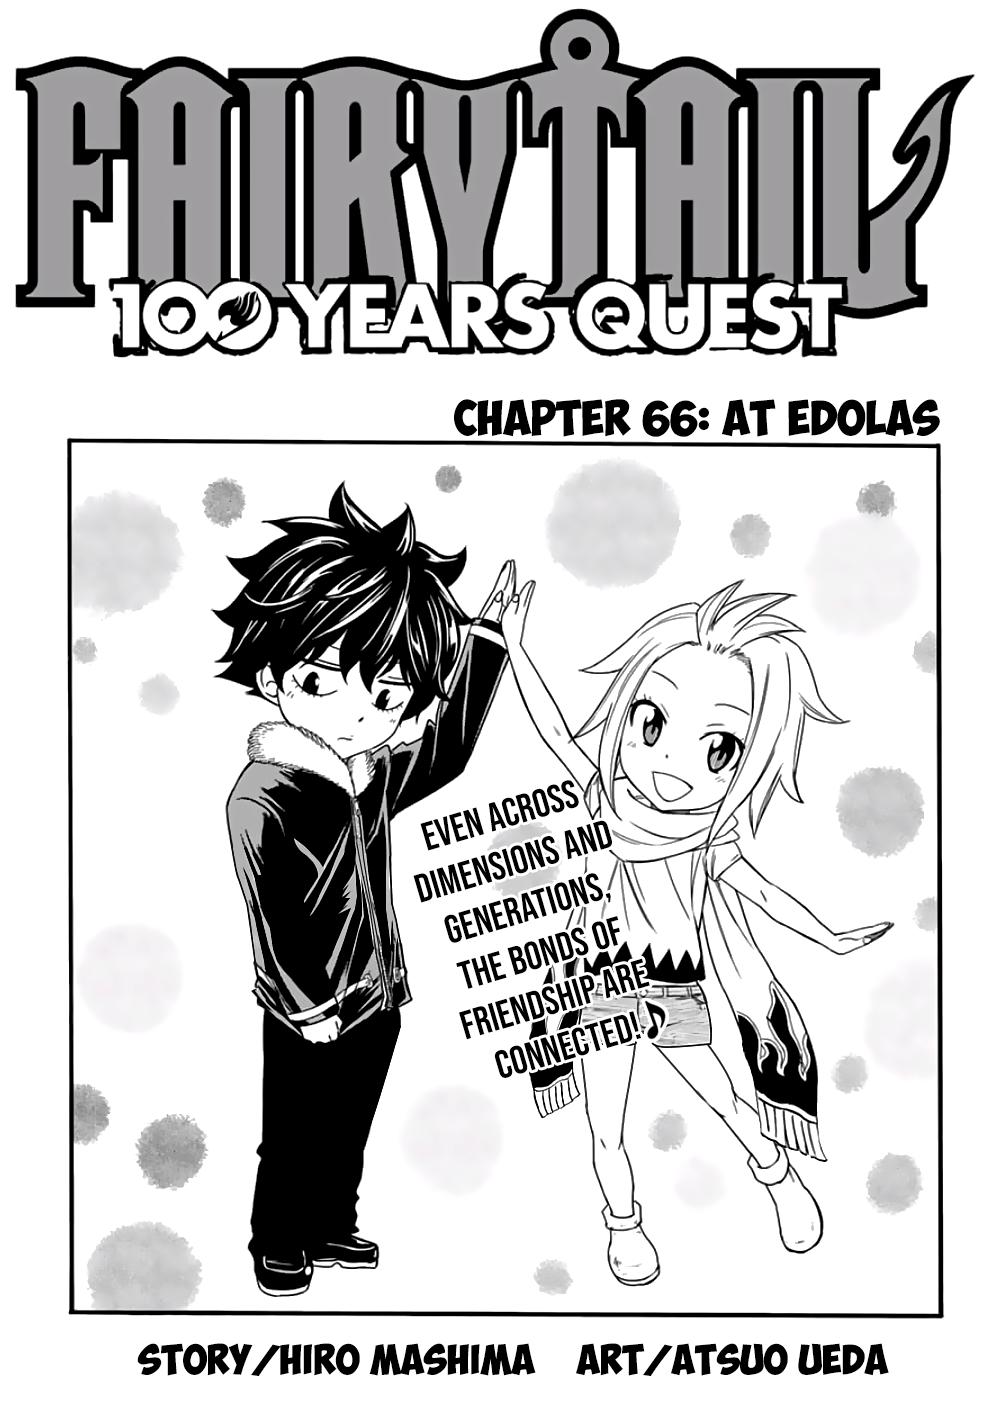 Fairy Tail: 100 Years Quest Release Date [Officially Announced]